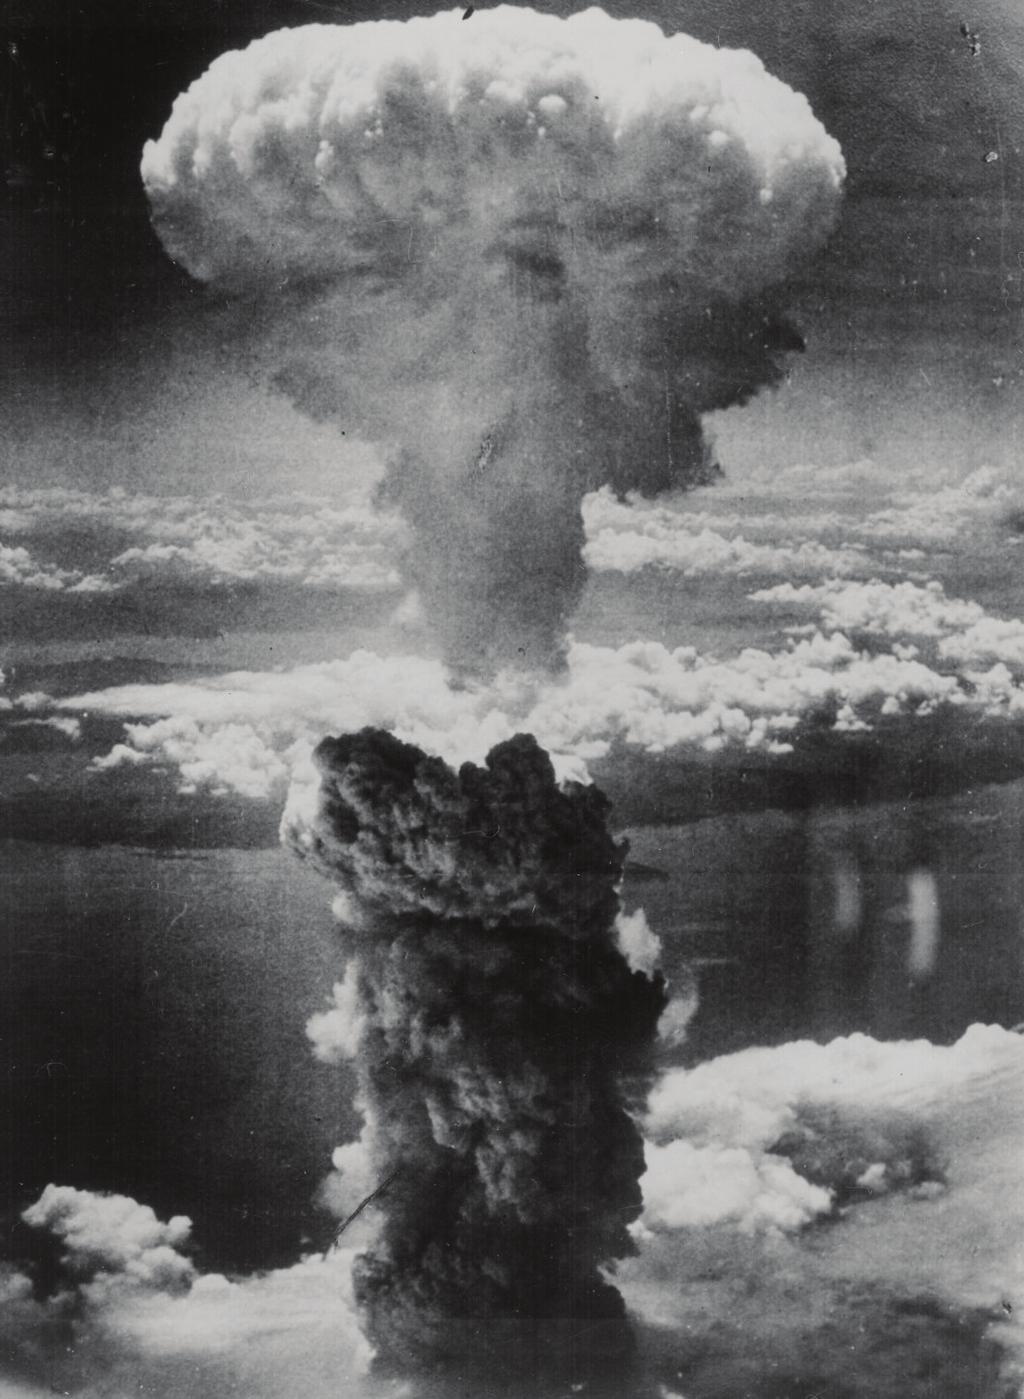 Figure 1. The mushroom cloud from the nuclear explosion over Nagasaki, August 9, 1945.